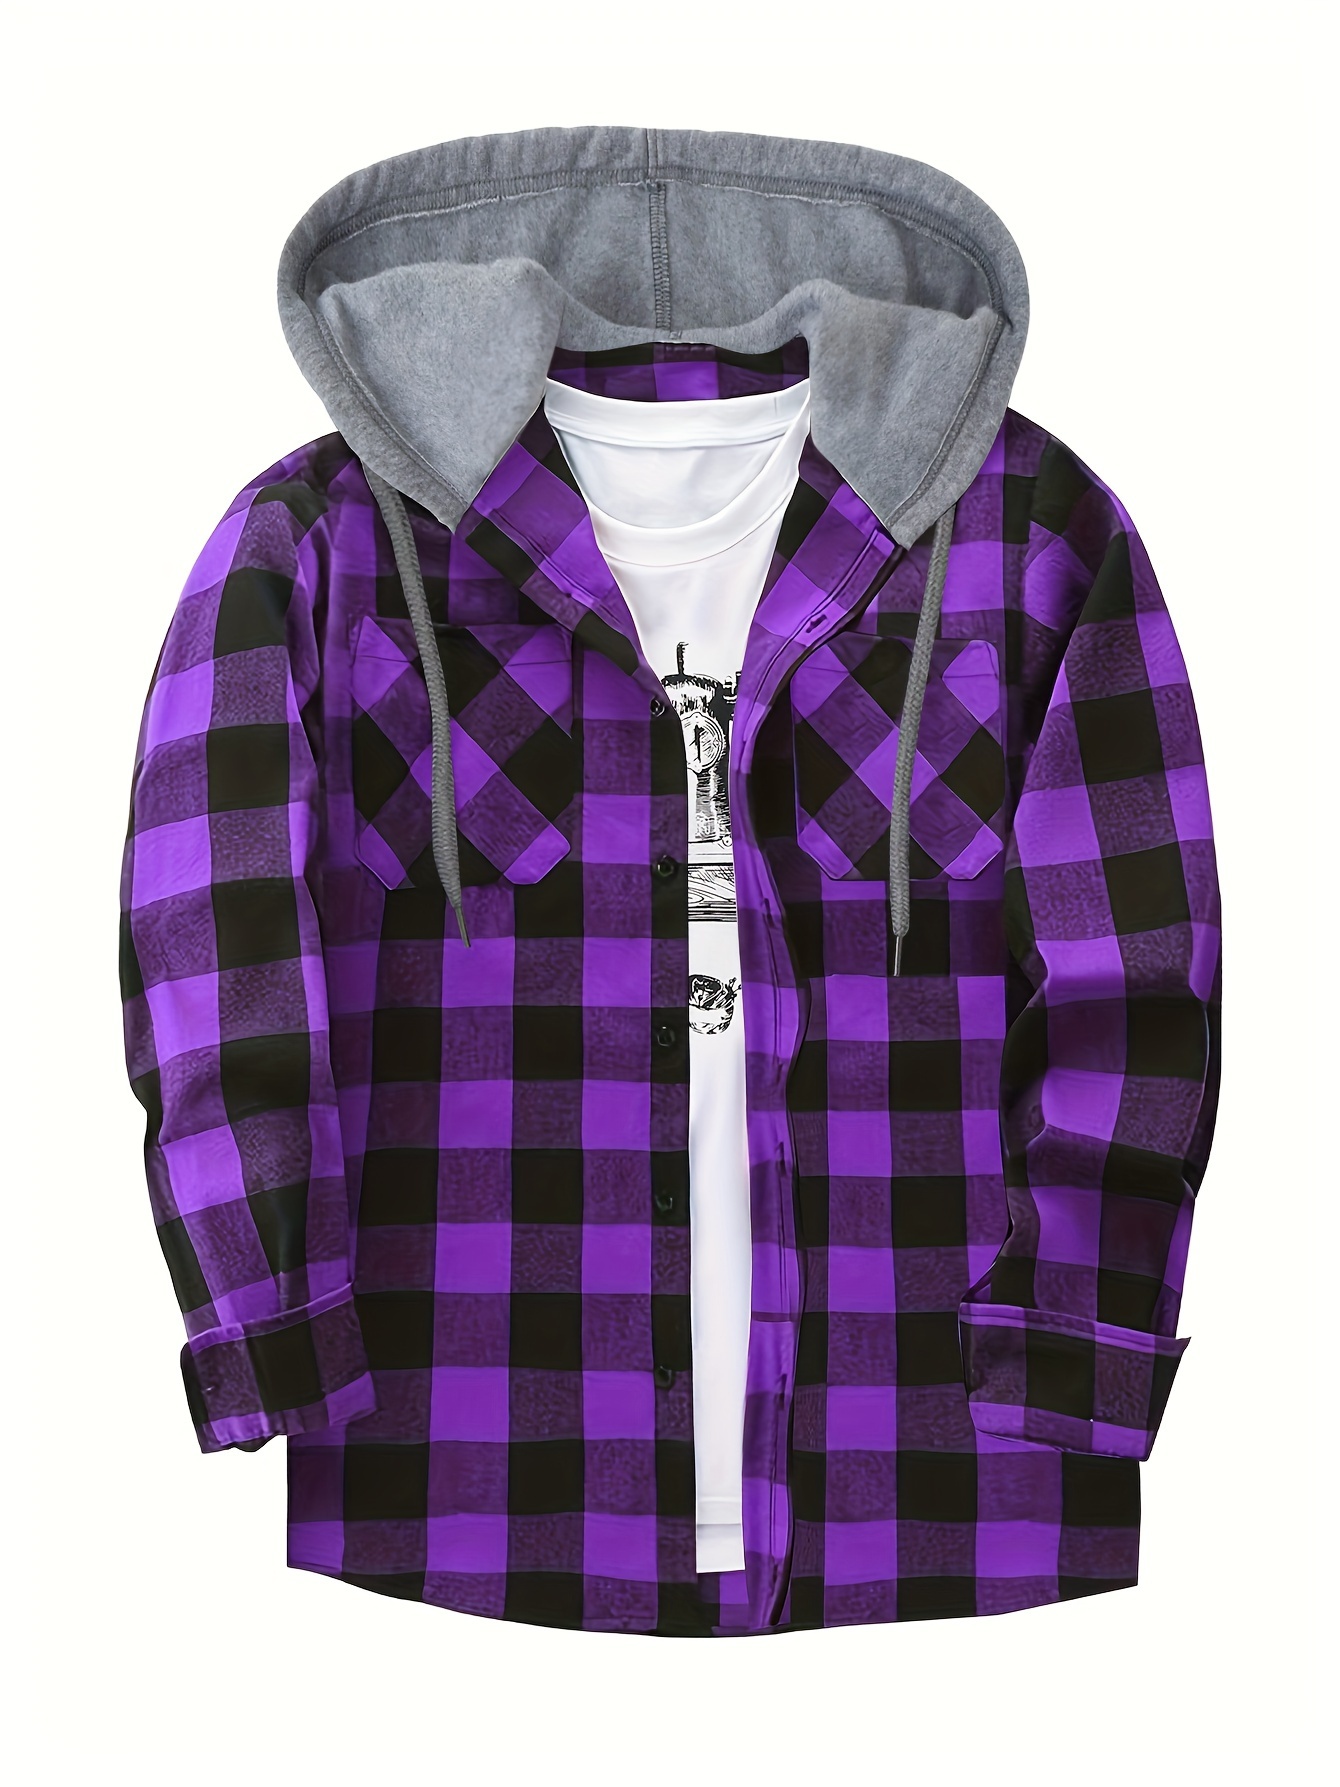 long sleeve casual regular fit button up hooded shirts jacket plaid shirt coat for men details 25